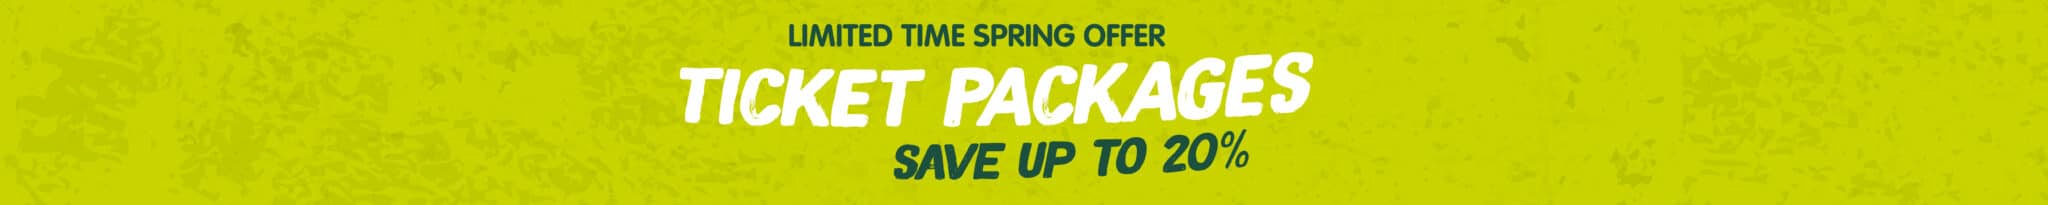 Up To 20% OFF Go Ape Ticket Packages